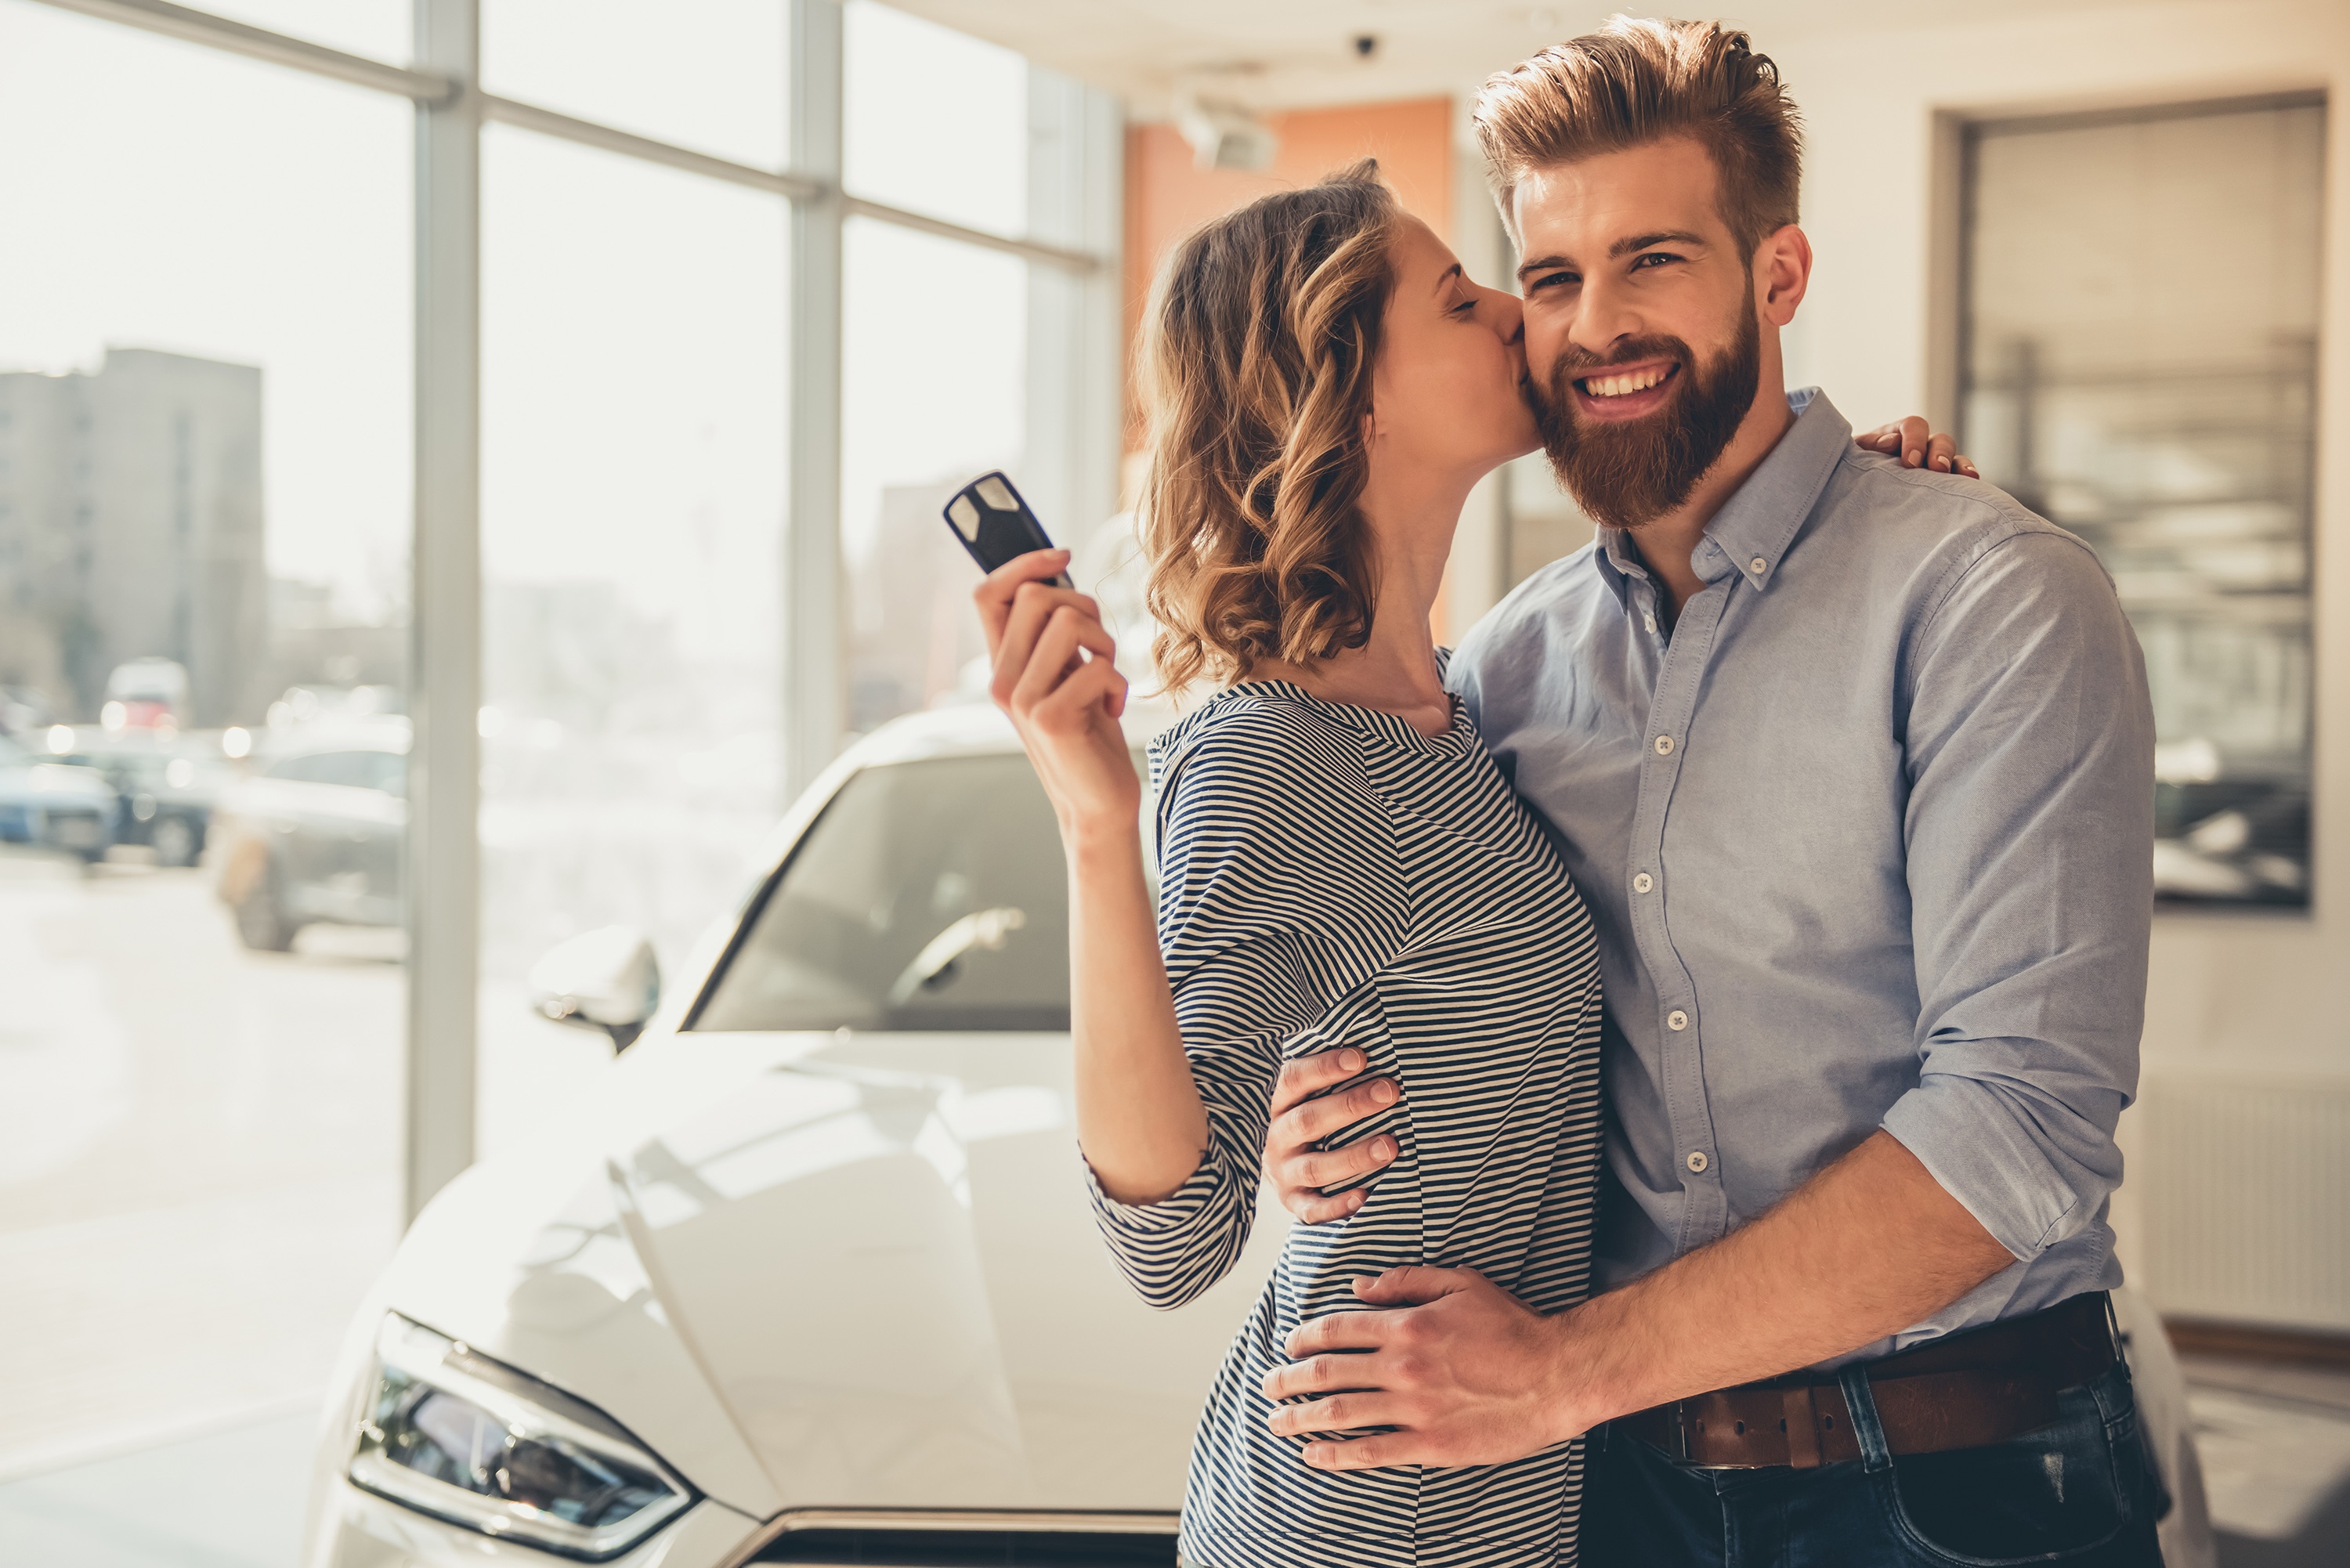 Navigating the Dealership: How to Buy a New Car Stress-Free